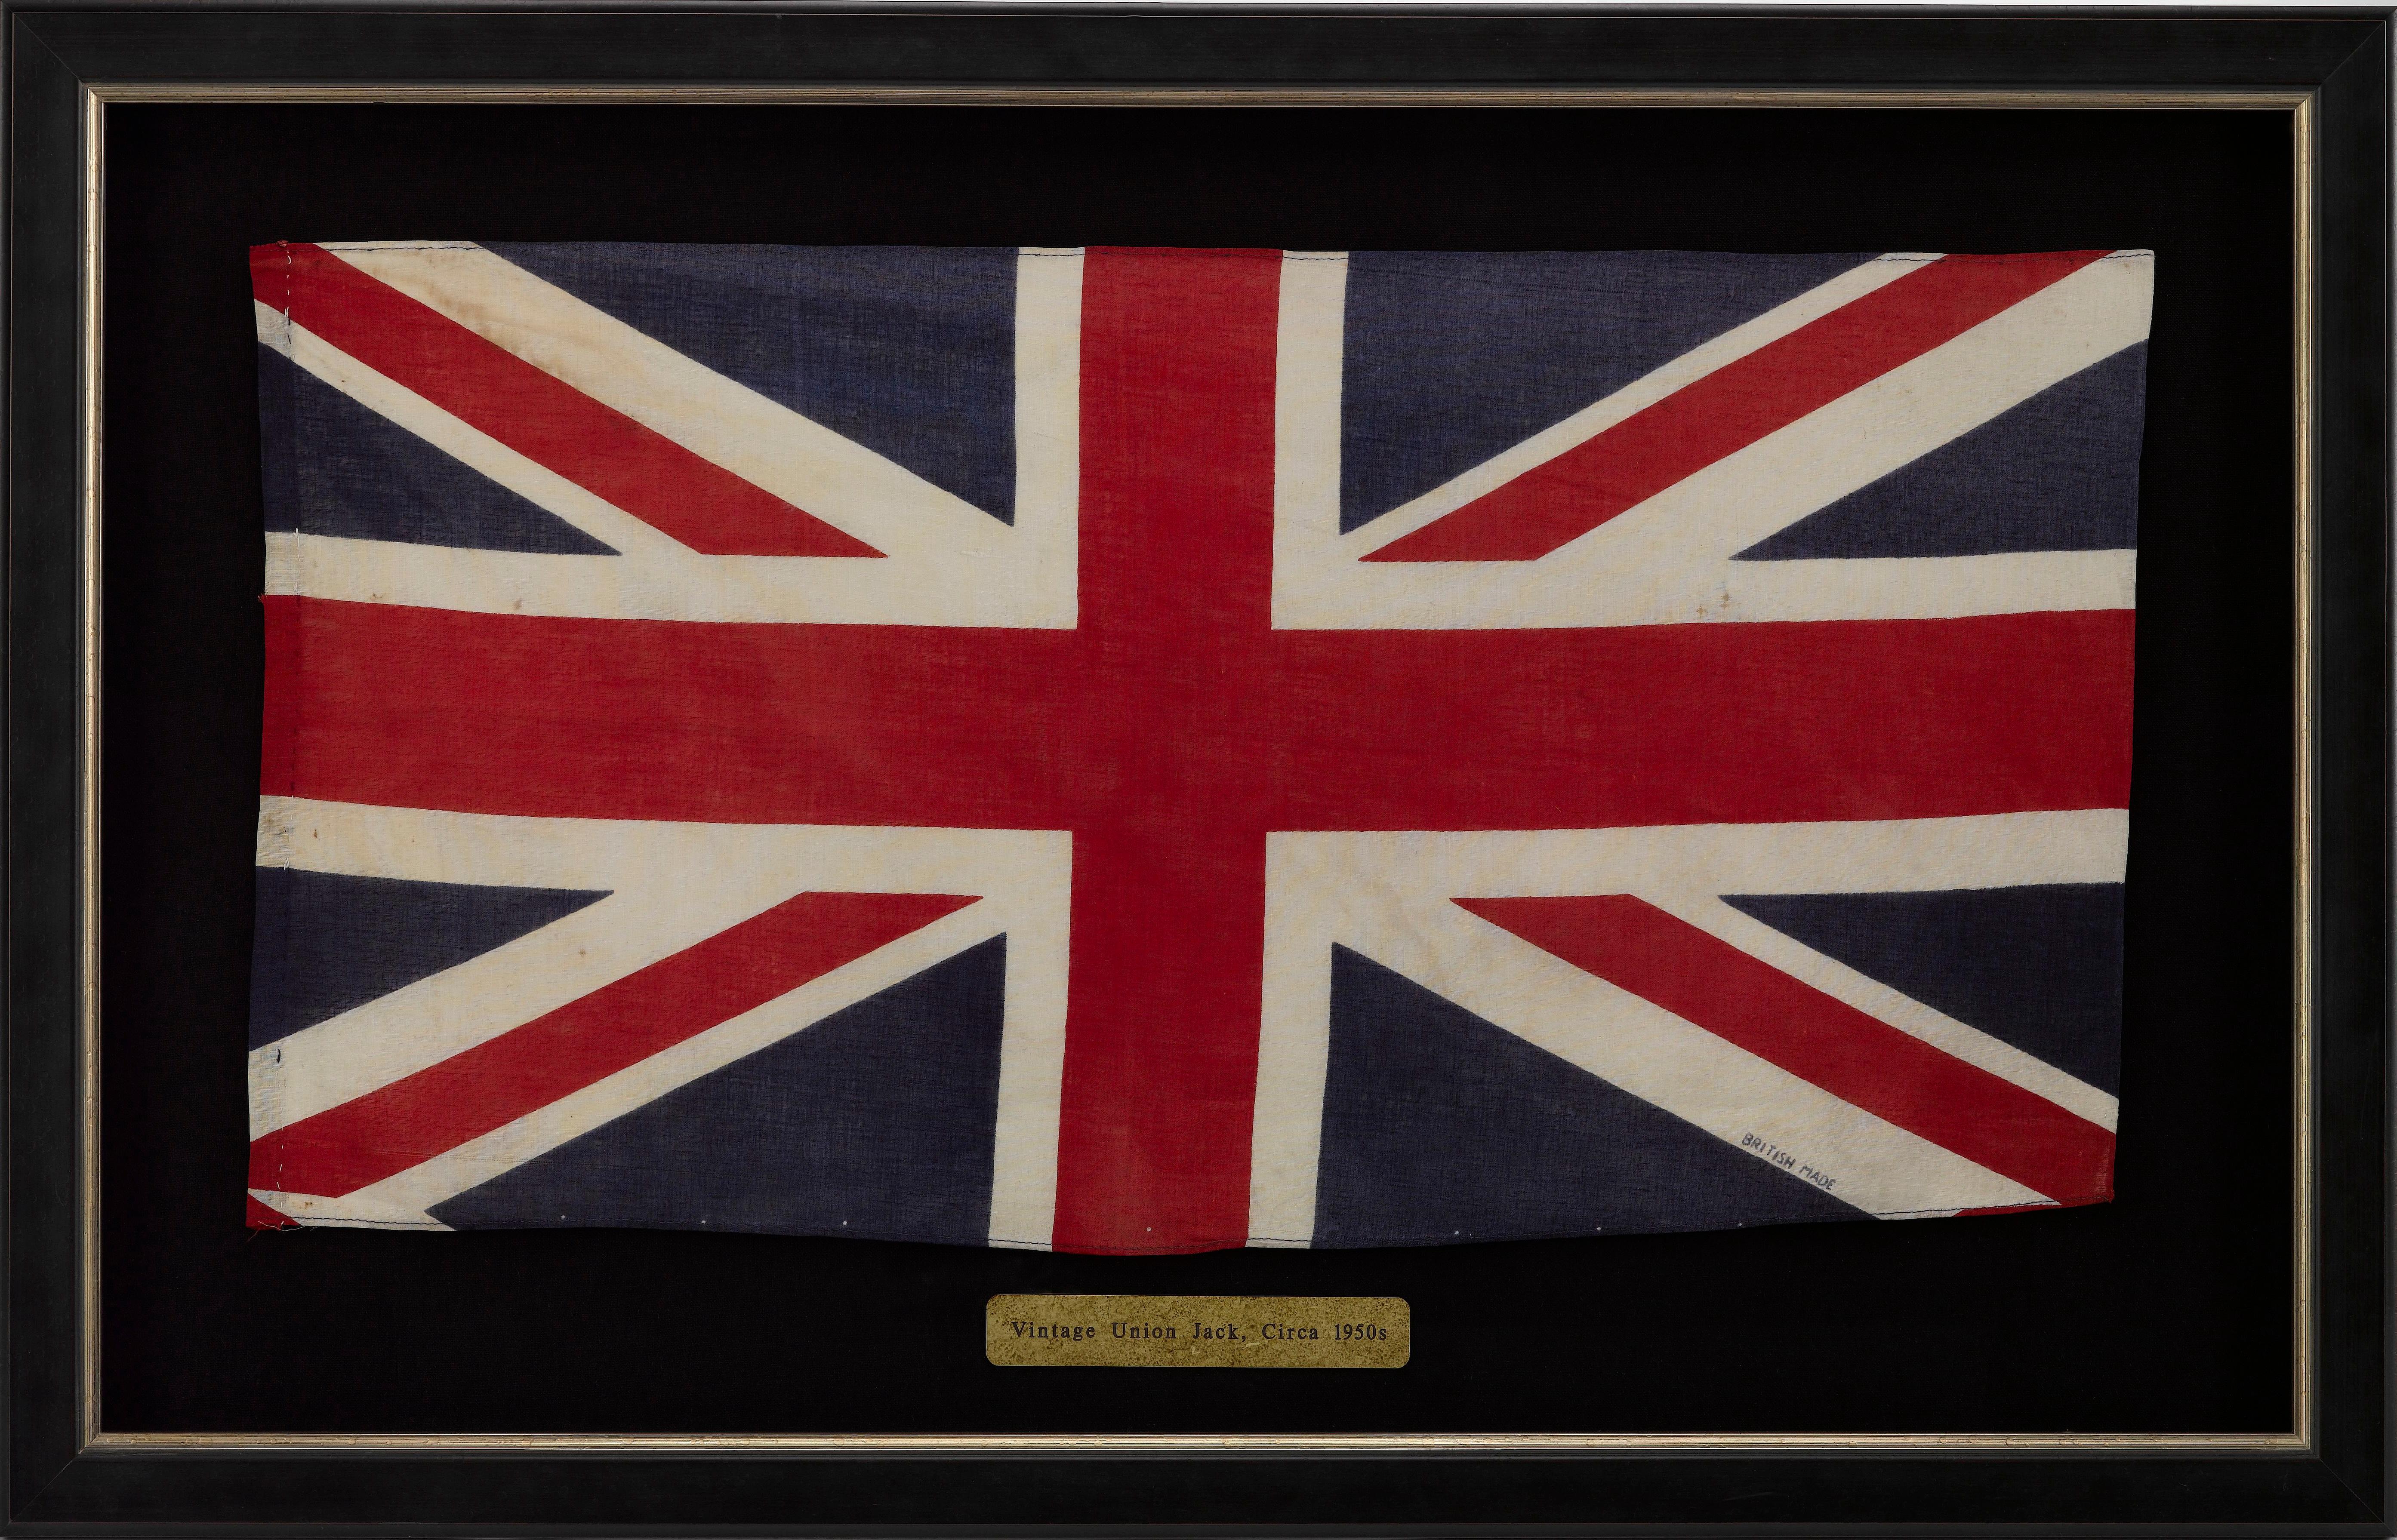 This is a beautiful Union Jack parade flag, dating from the early 1950s, during the early years of Queen Elizabeth II's reign. The flag is printed on cotton, with machine-sewn hemmed top and bottom. The flag has a hand-sewn envelope hoist and is